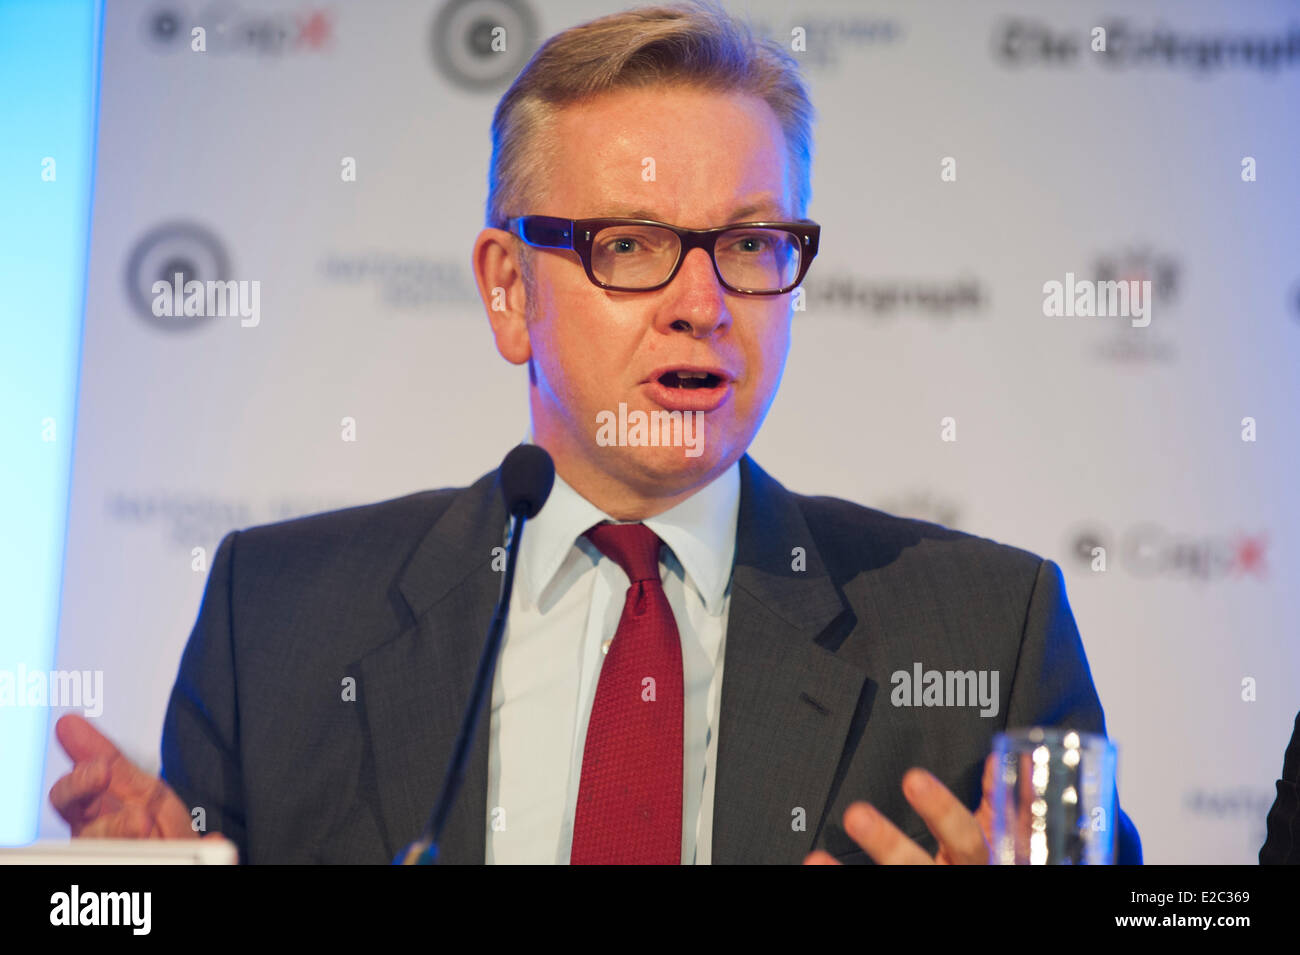 London, UK. 18th June, 2014. Michael Gove Education Secretary speaker at the Margaret Thatcher Conference on Liberty 2014, Guildhall, London, UK Credit:  Prixnews/Alamy Live News Stock Photo